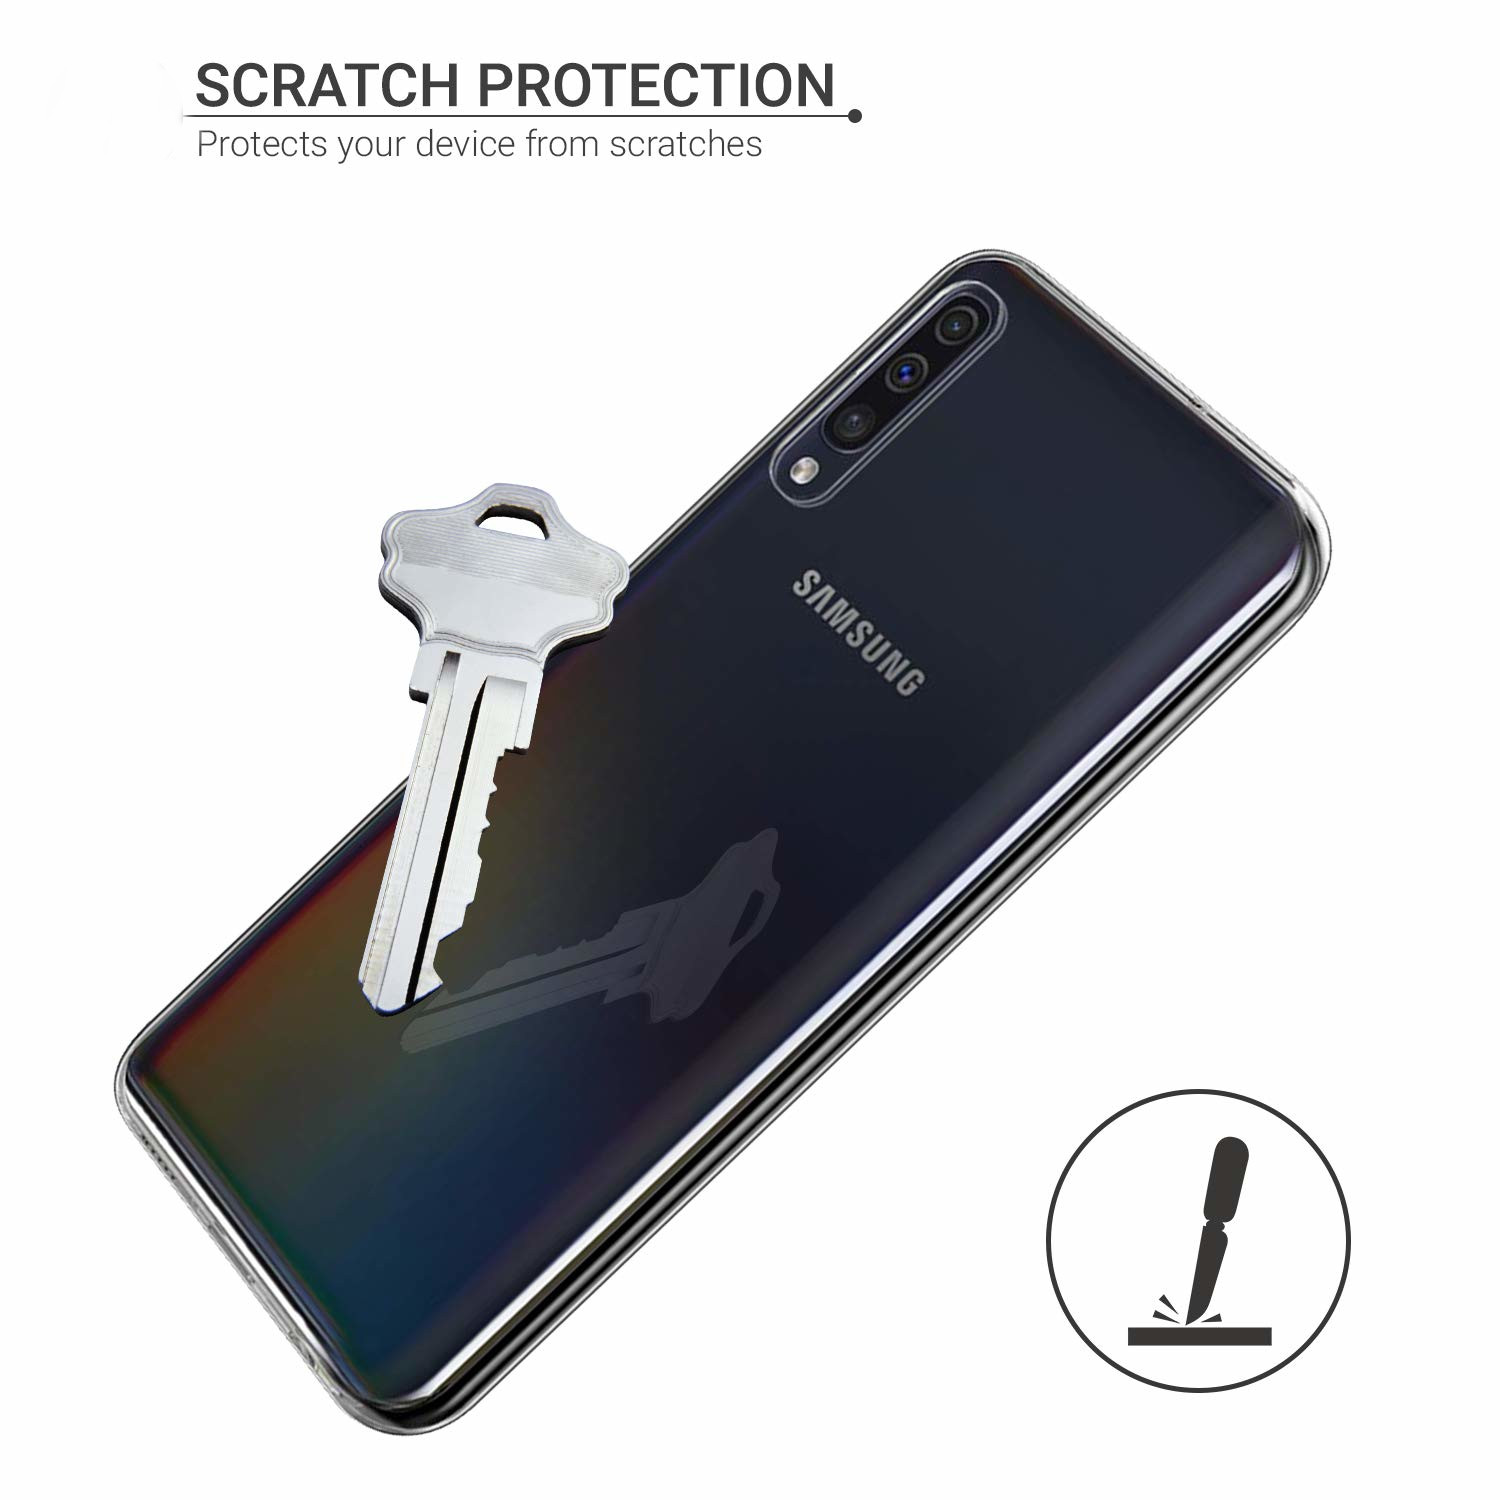 Bakeey-Ultra-Thin-Shockproof-Transparent-Soft-TPU-Protective-Case-for-Samsung-Galaxy-A70-2019-1498204-2